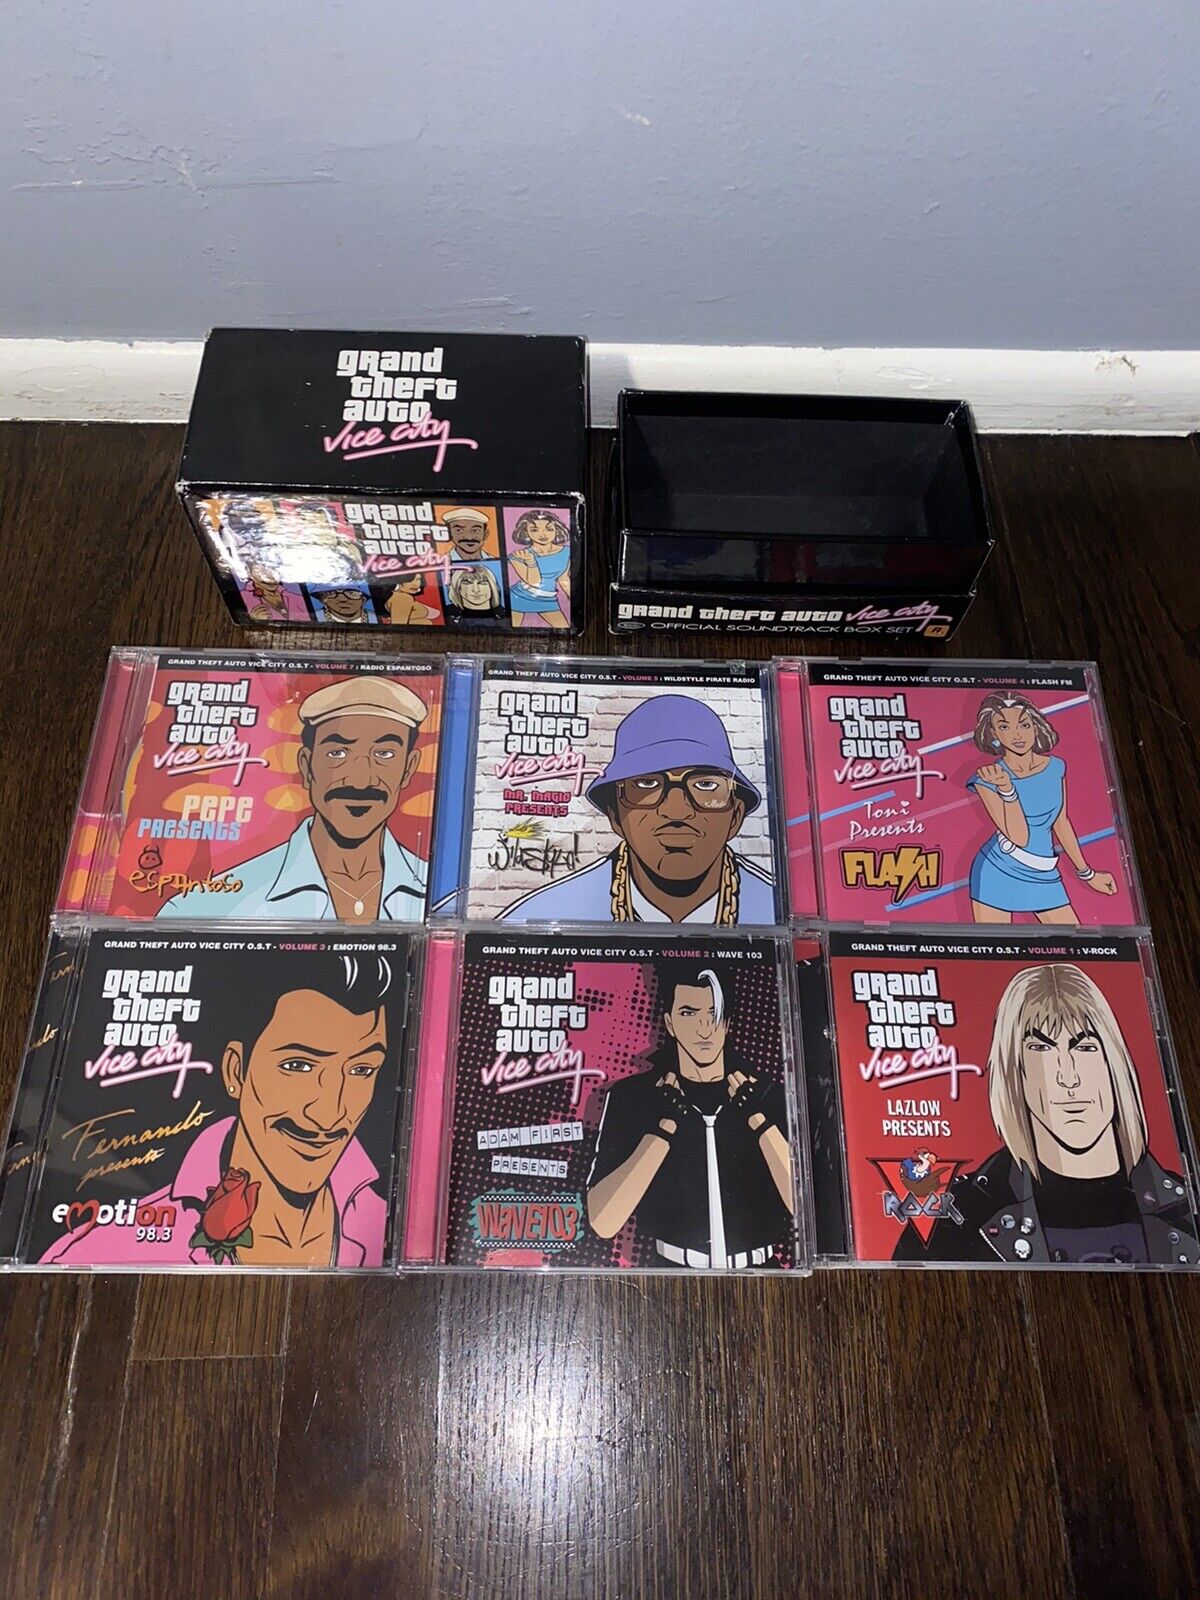 Grand Theft Auto: Vice City Official Soundtrack Box Set: Missing 1 CD \